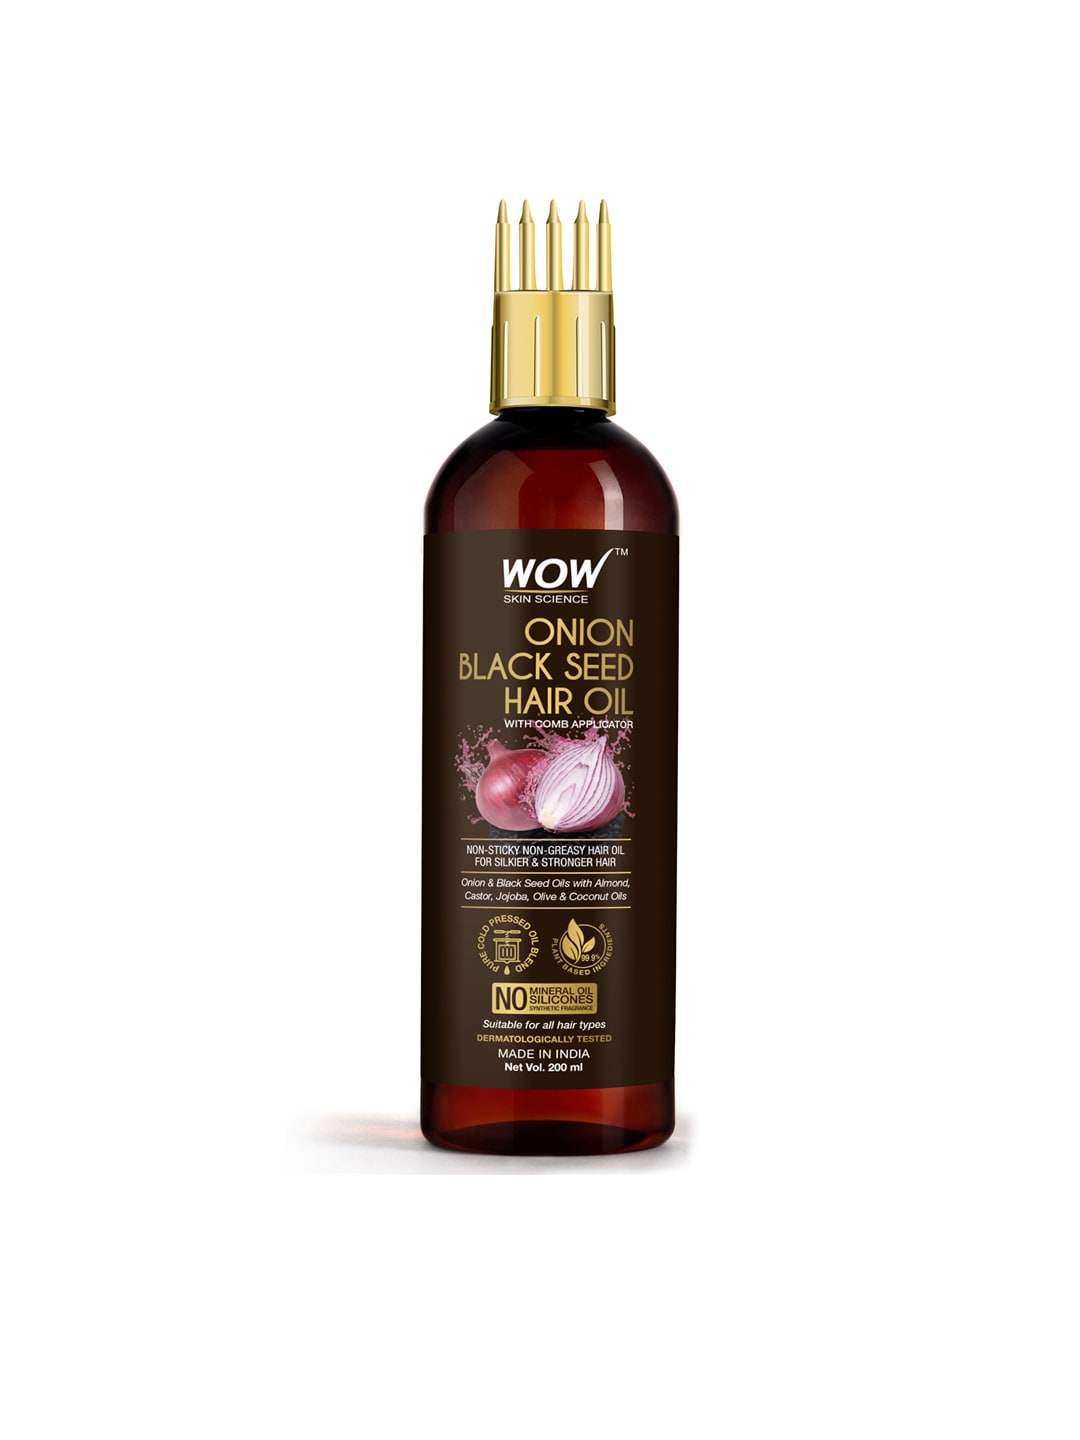 WOW SKIN SCIENCE Onion Hair Oil with Black Seed Oil Extracts with Comb Applicator - 200 ml Price in India